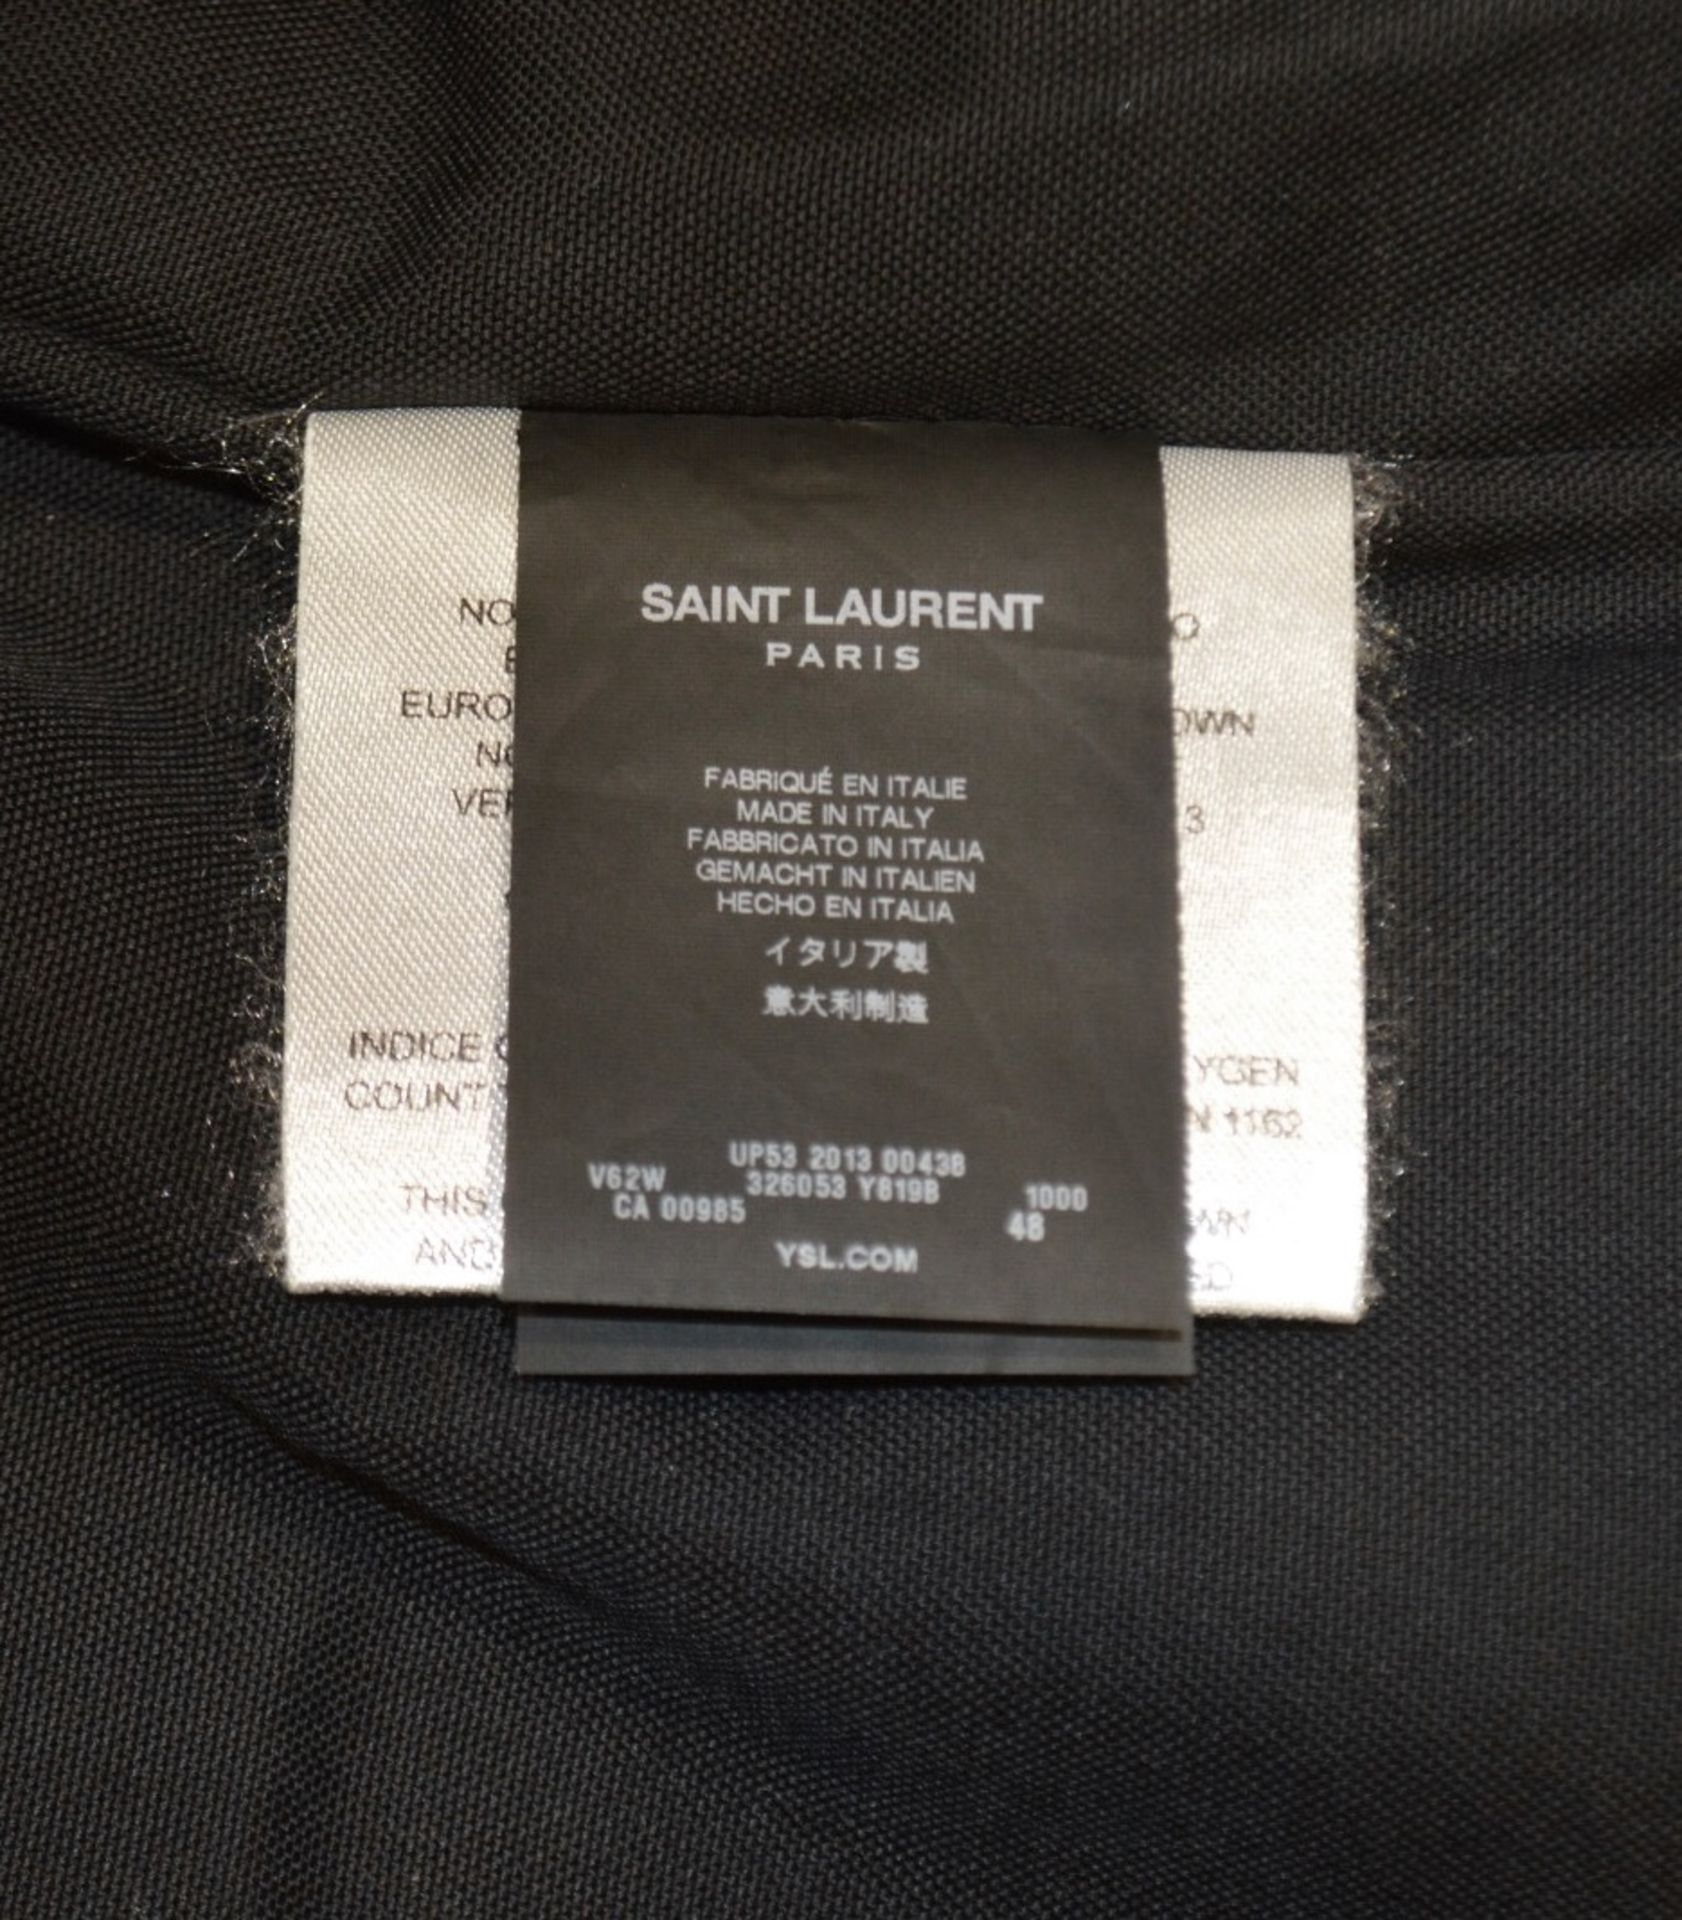 1 x Men's Genuine Yves Saint Laurant Gillet / Body Warmer In Black With Leather Panelling - Image 5 of 8